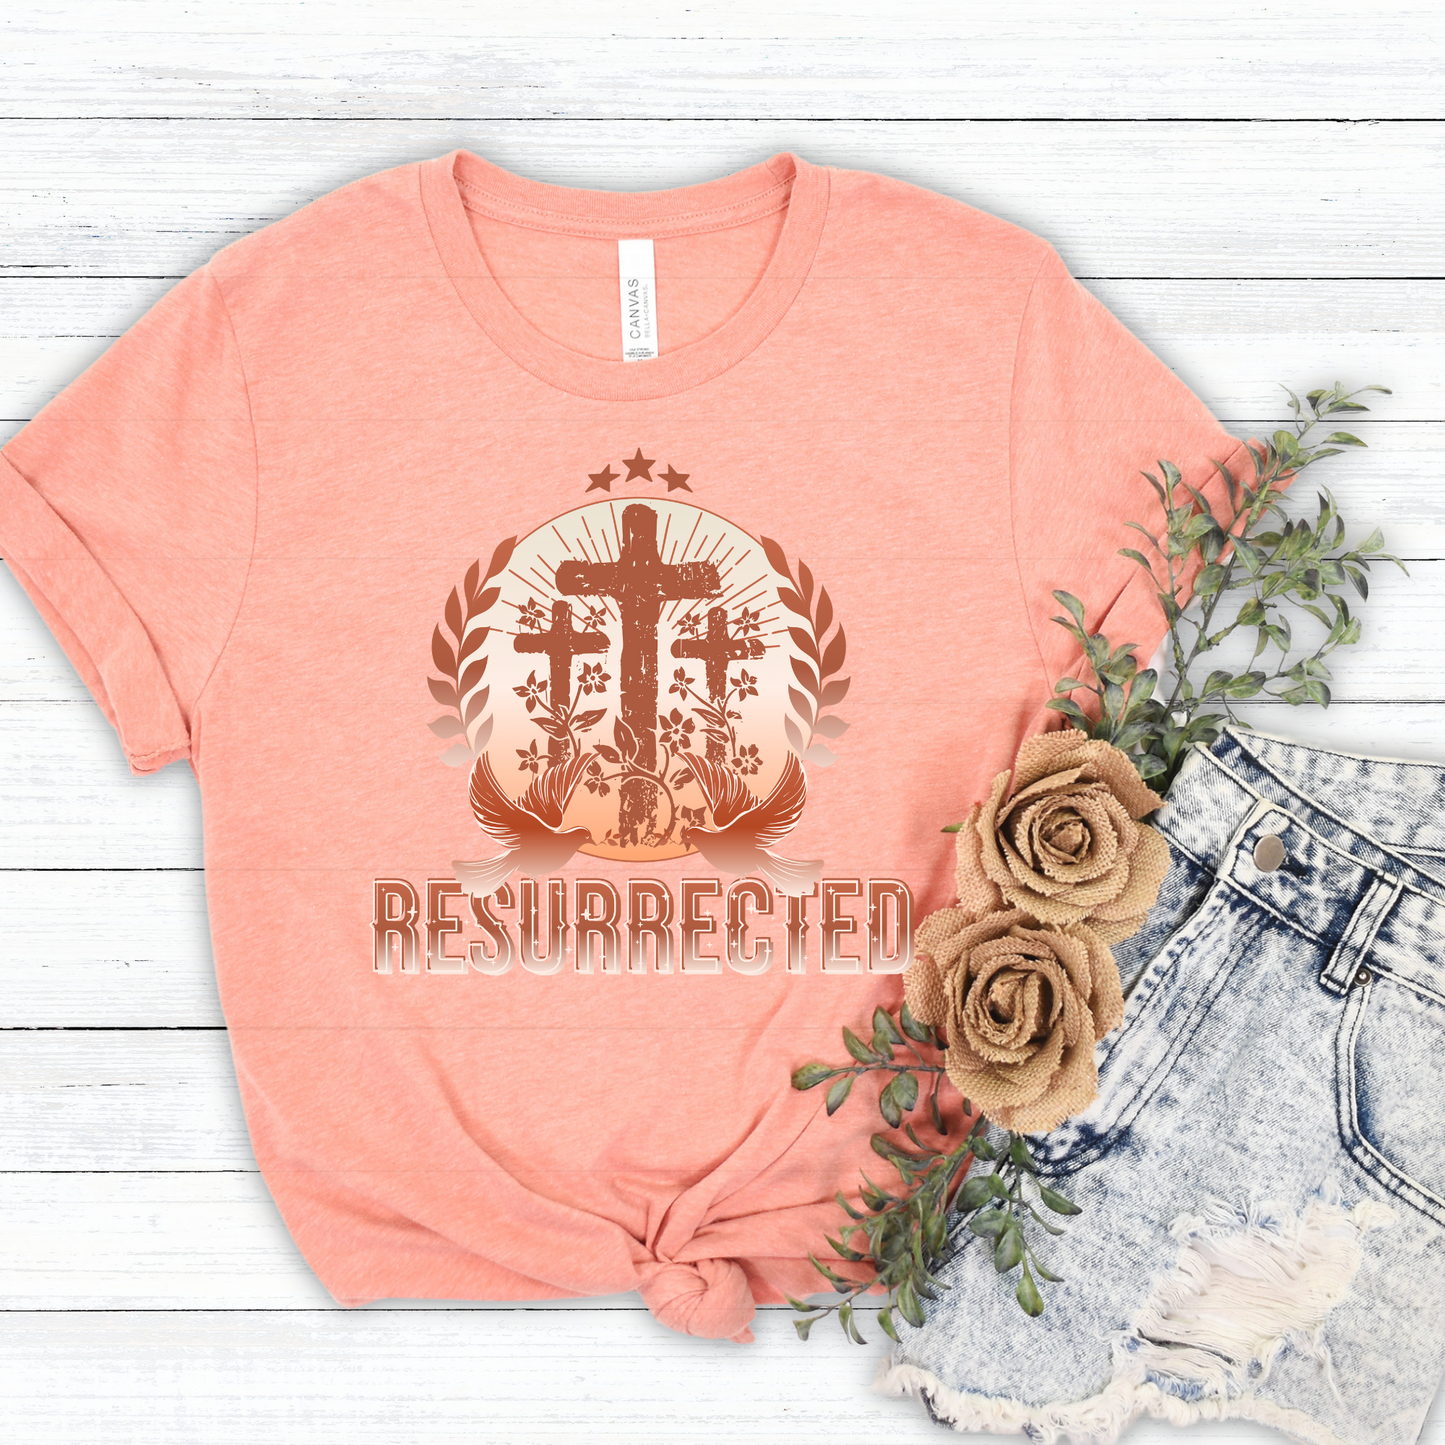 Resurrected tee - Additional colors